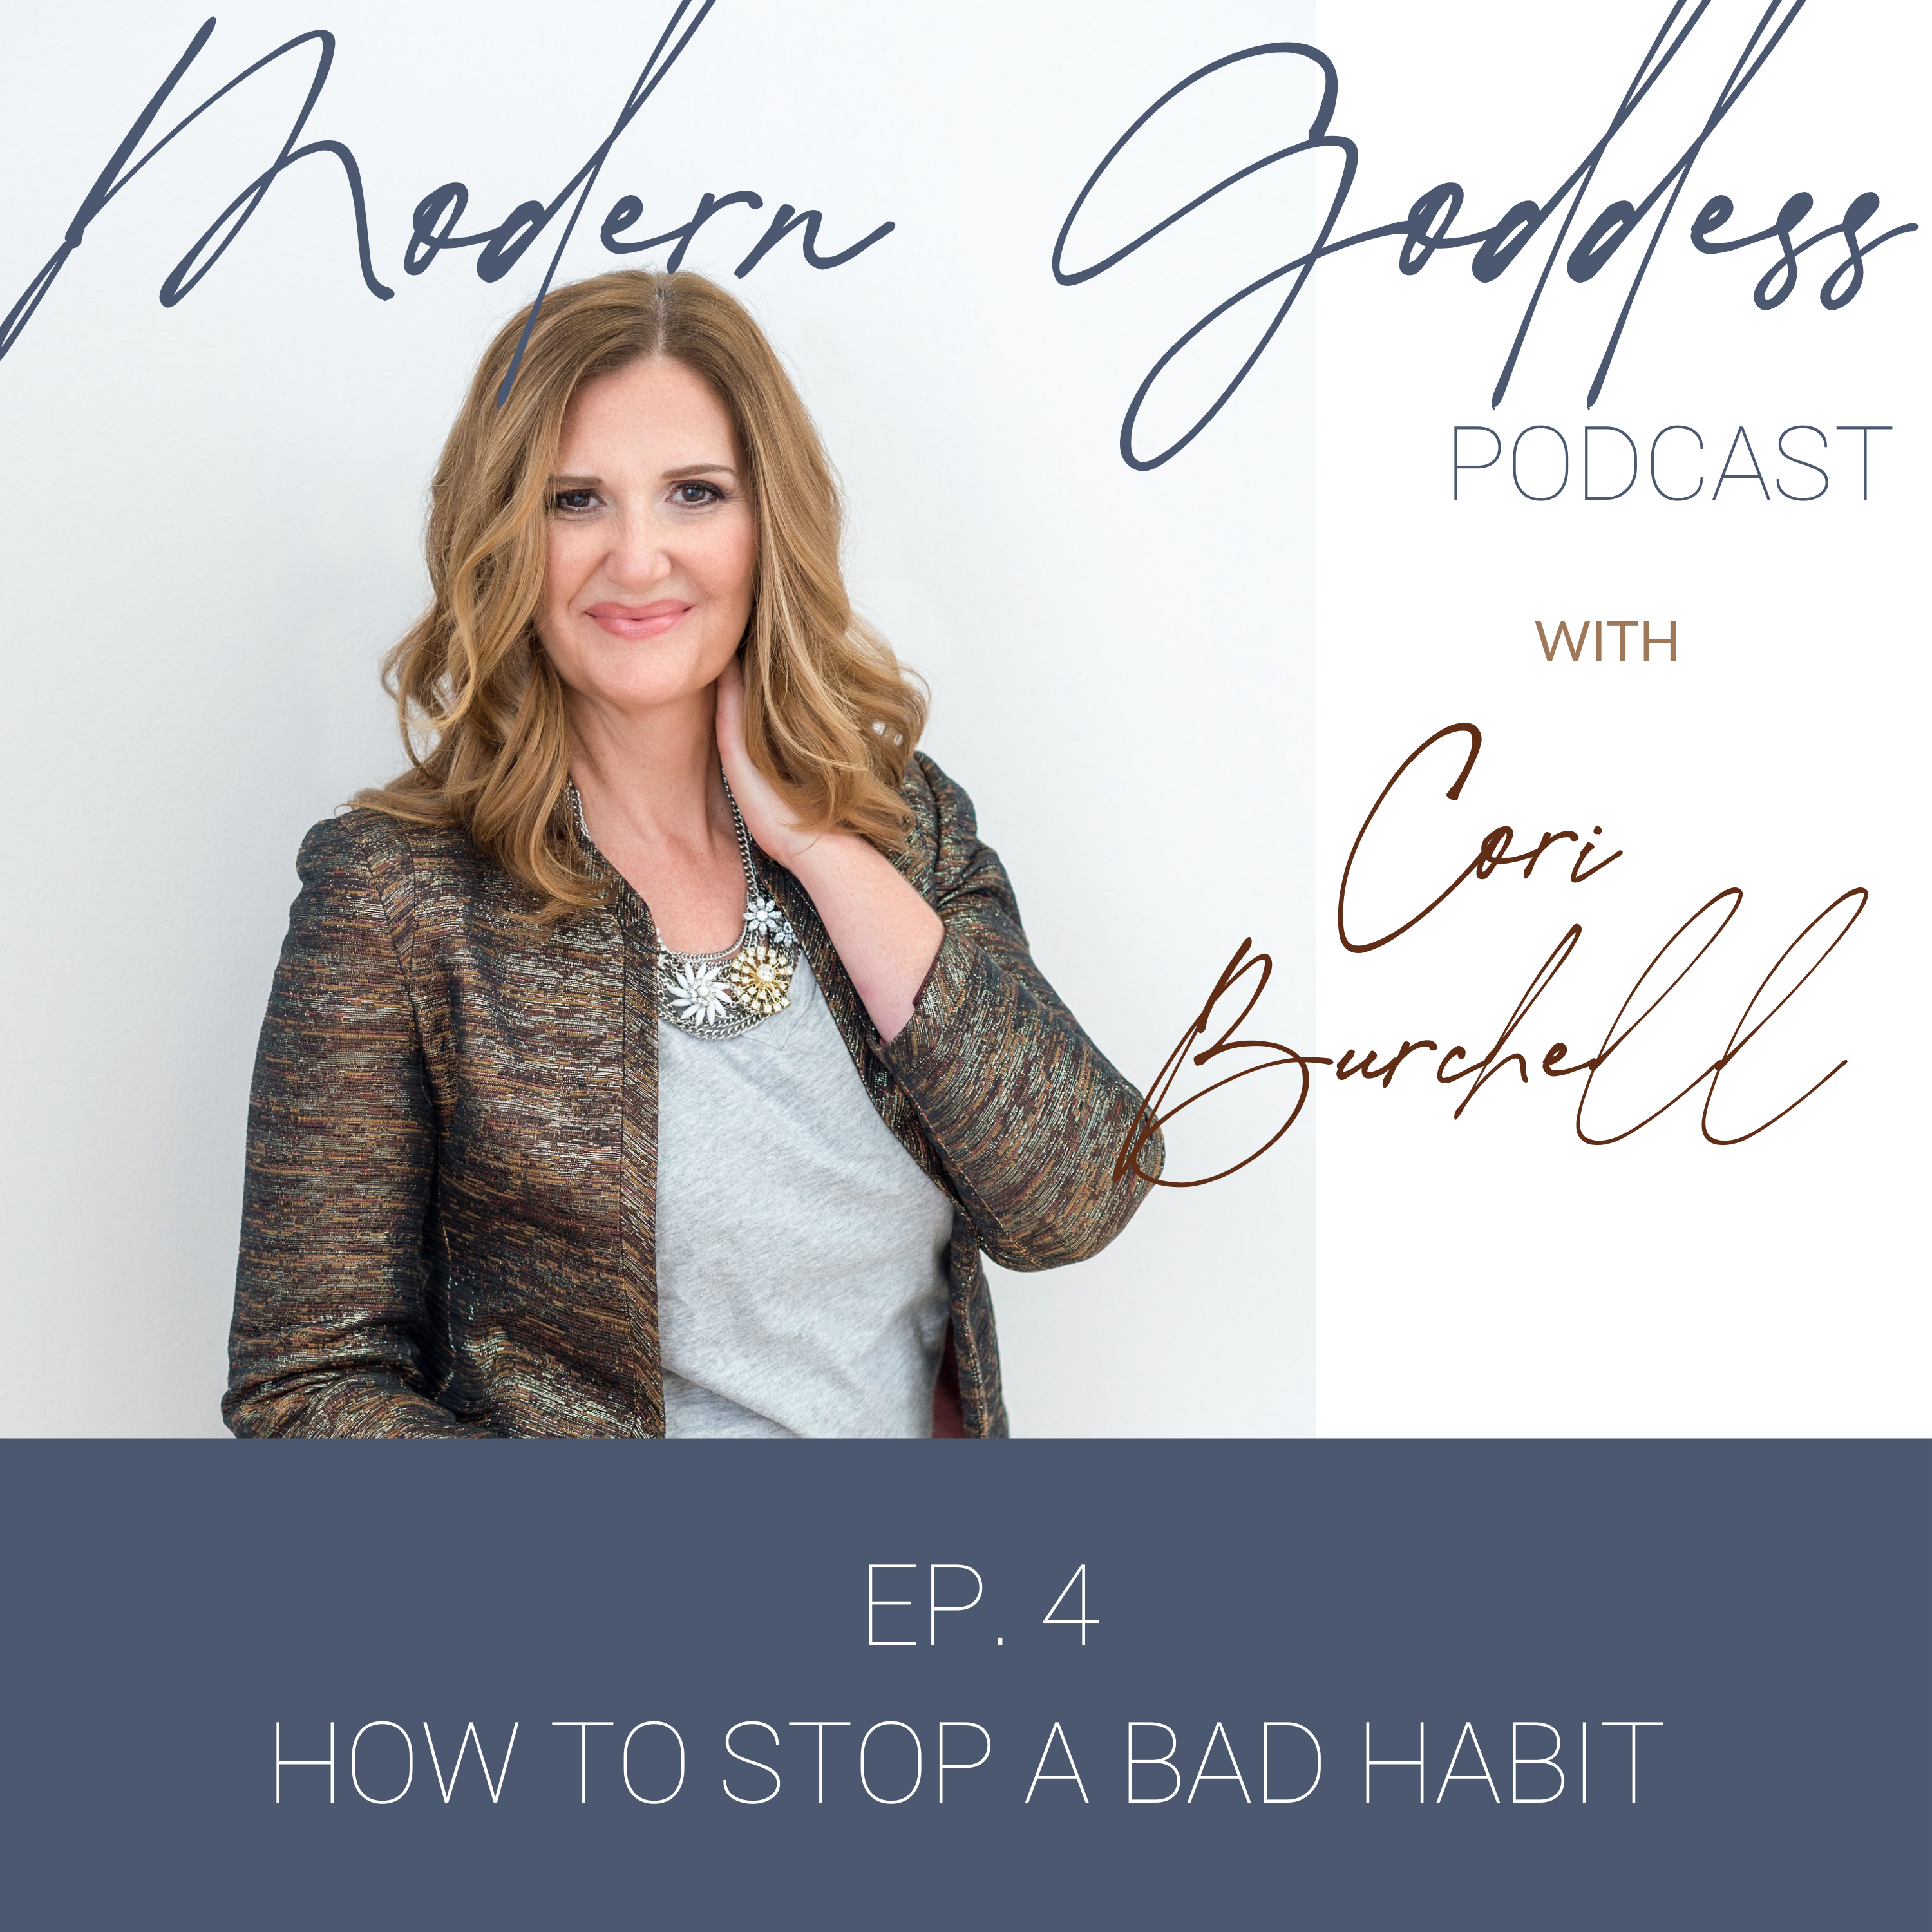 How to stop a bad habit